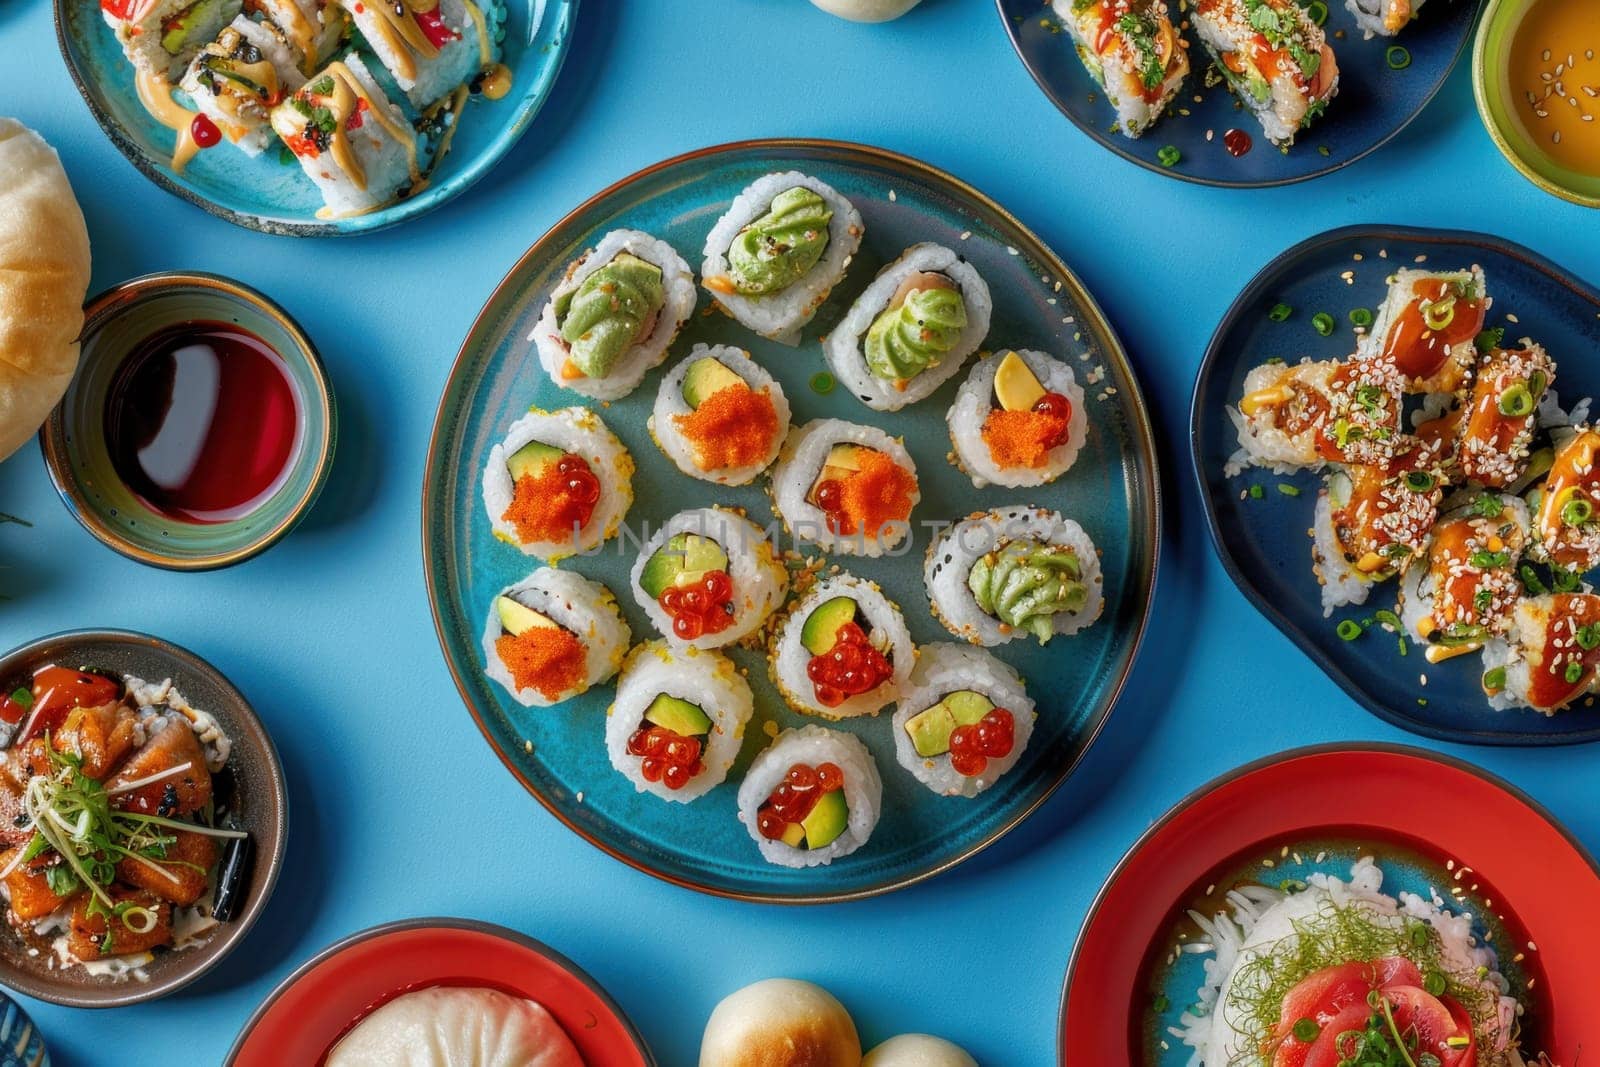 Various plates of sushi and other food on a blue table with a blue background for a culinary adventure by Vichizh